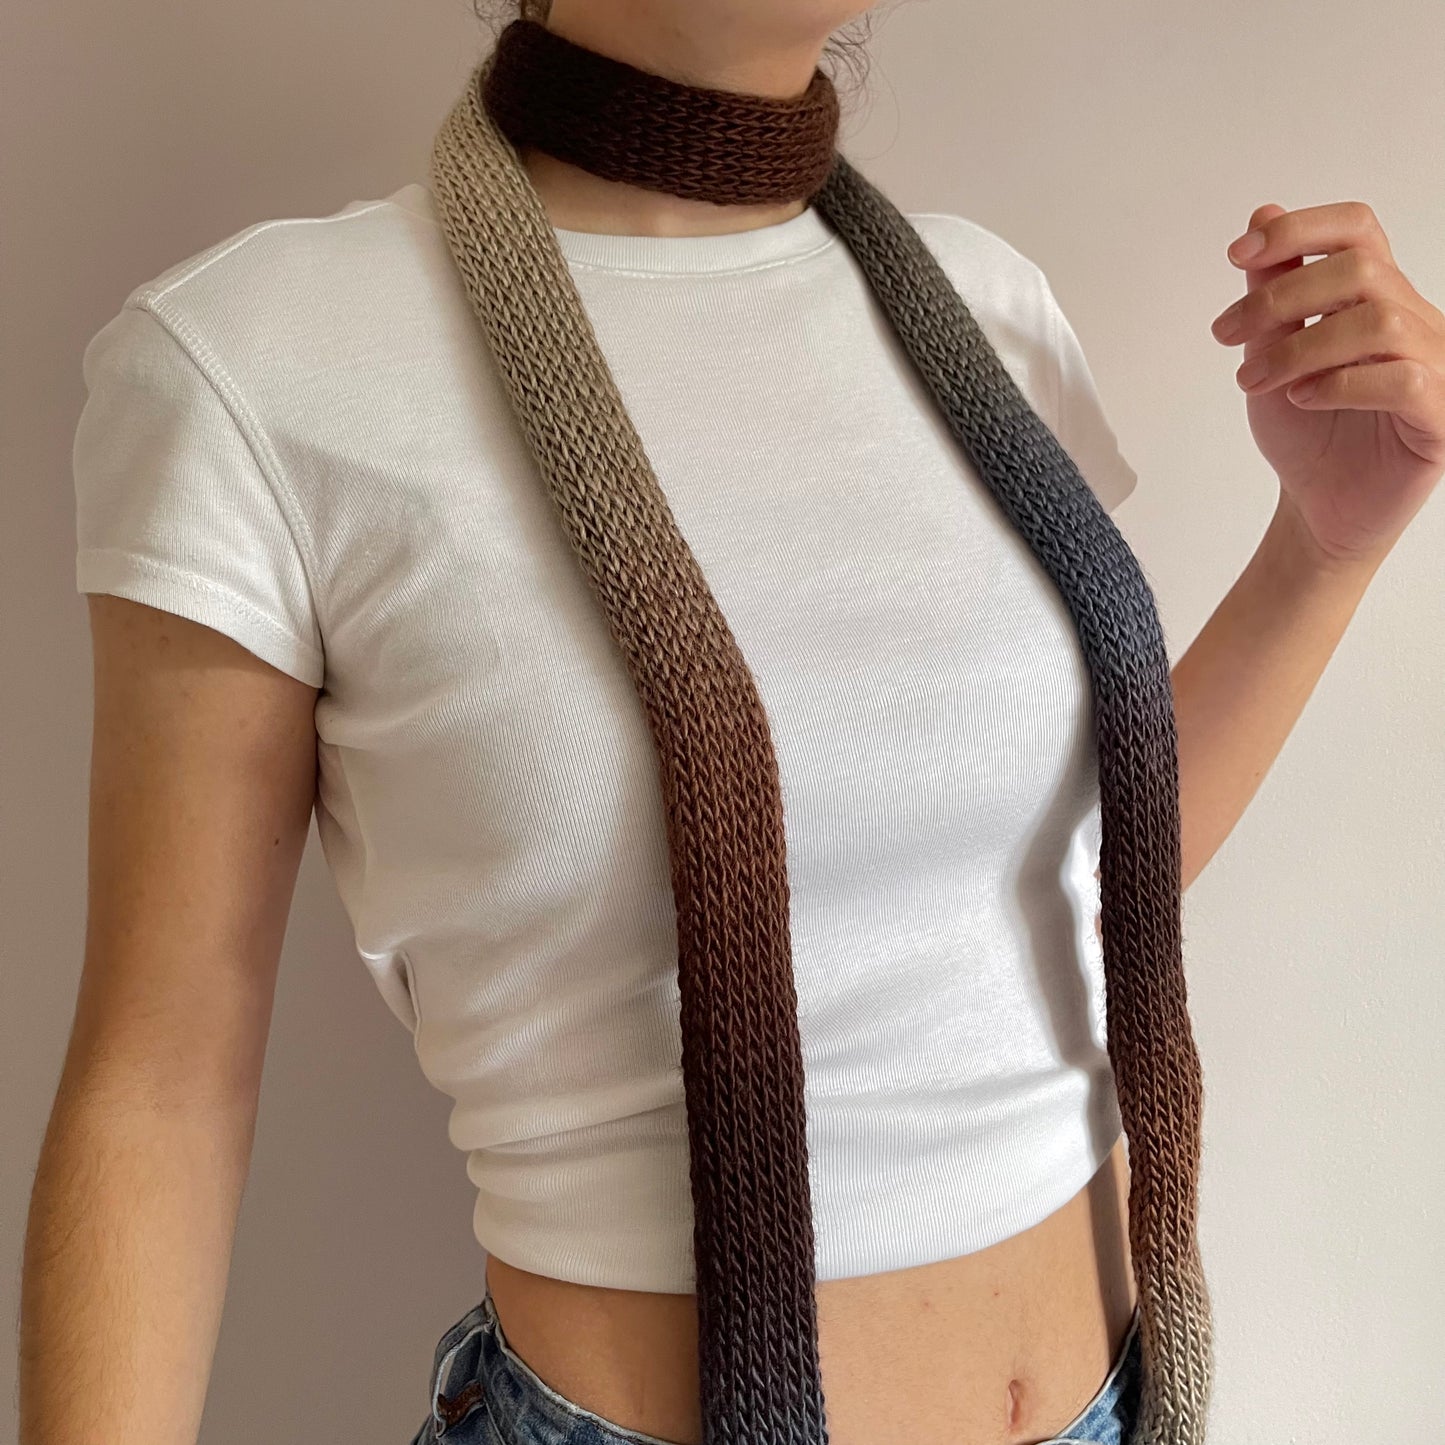 Handmade knitted ombré skinny scarf - Seashell colourway